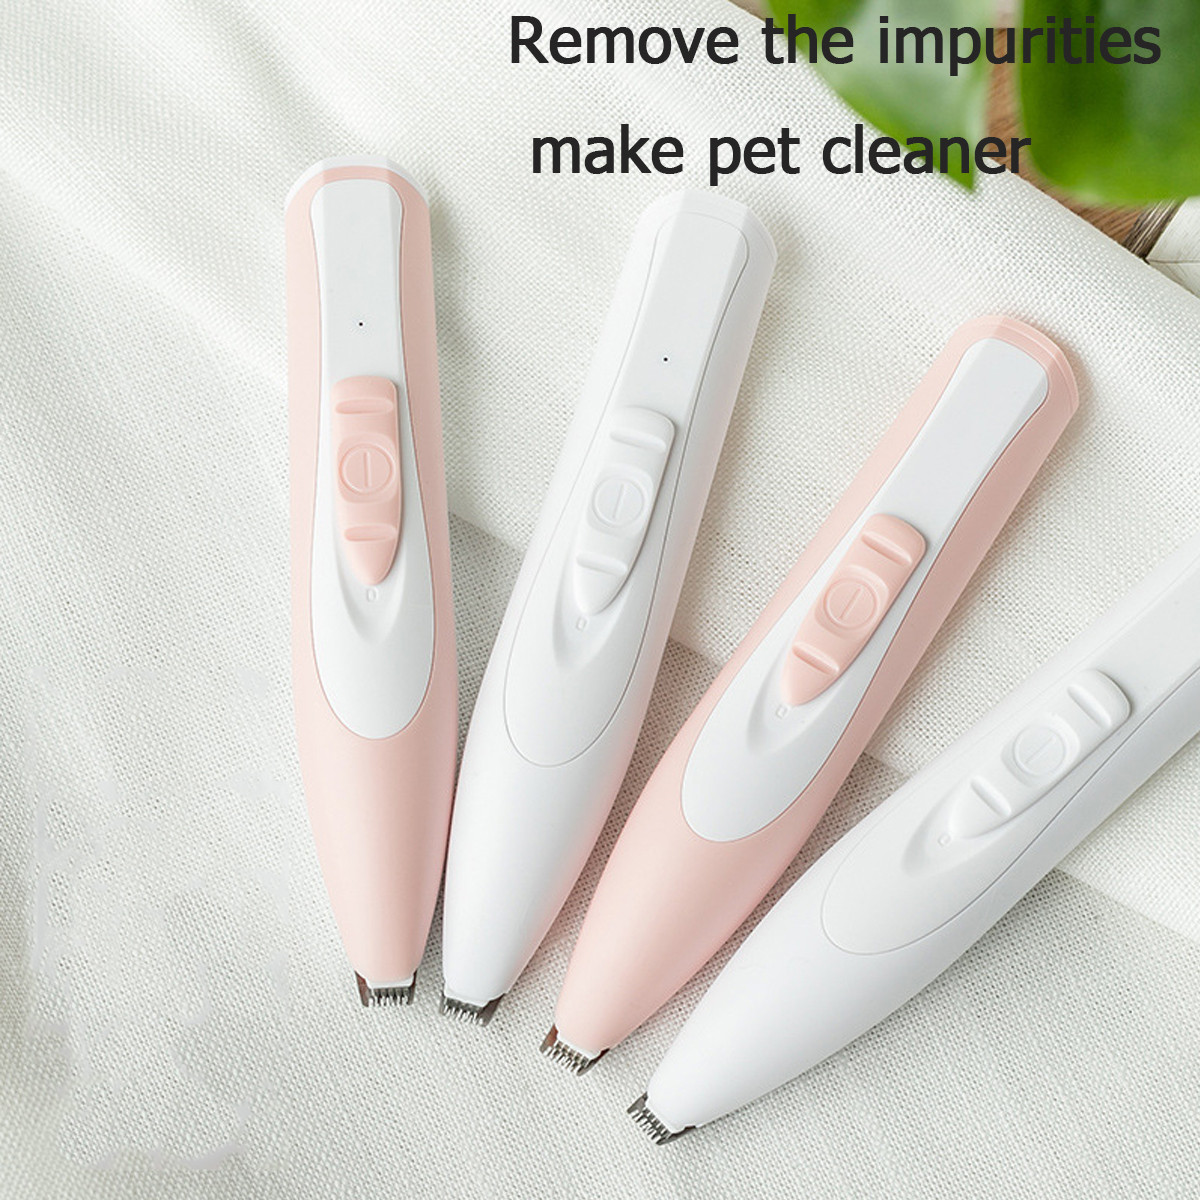 USB-Rechargeable-Electric-Pet-Nail-Hair-Trimmer-Grinder-CatDog-Grooming-Tool-Electrical-Shearing-Cut-1696667-3